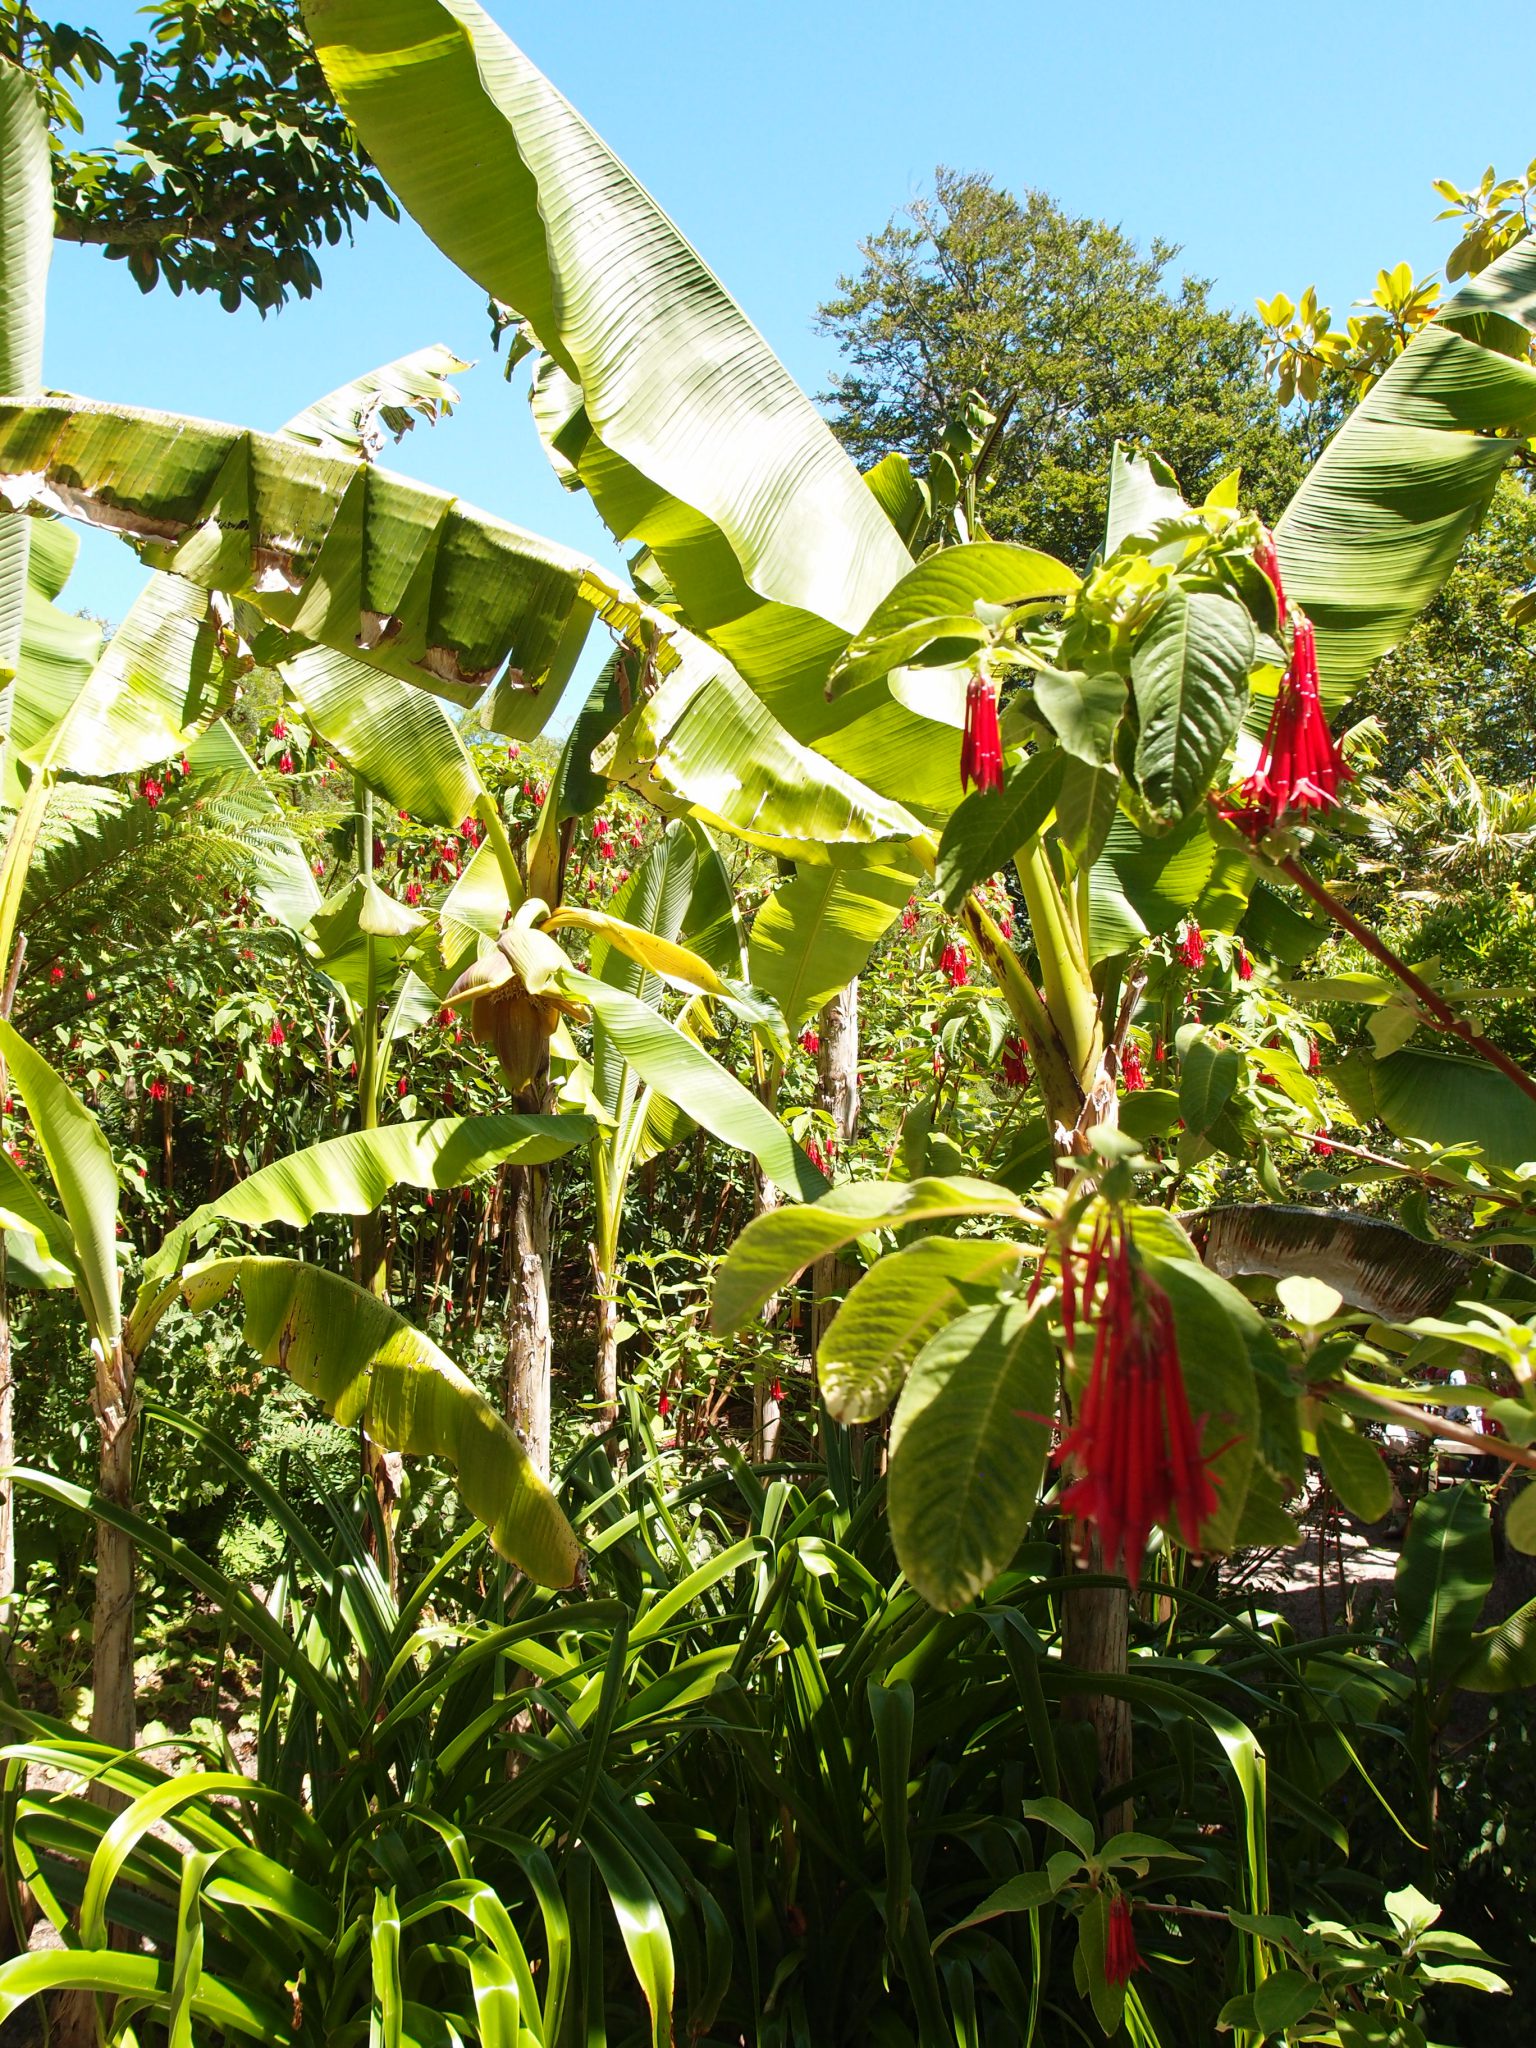 In the Banana Garden: the scarlet blossoms of Earring Flowers (Fuchsia boliviana)